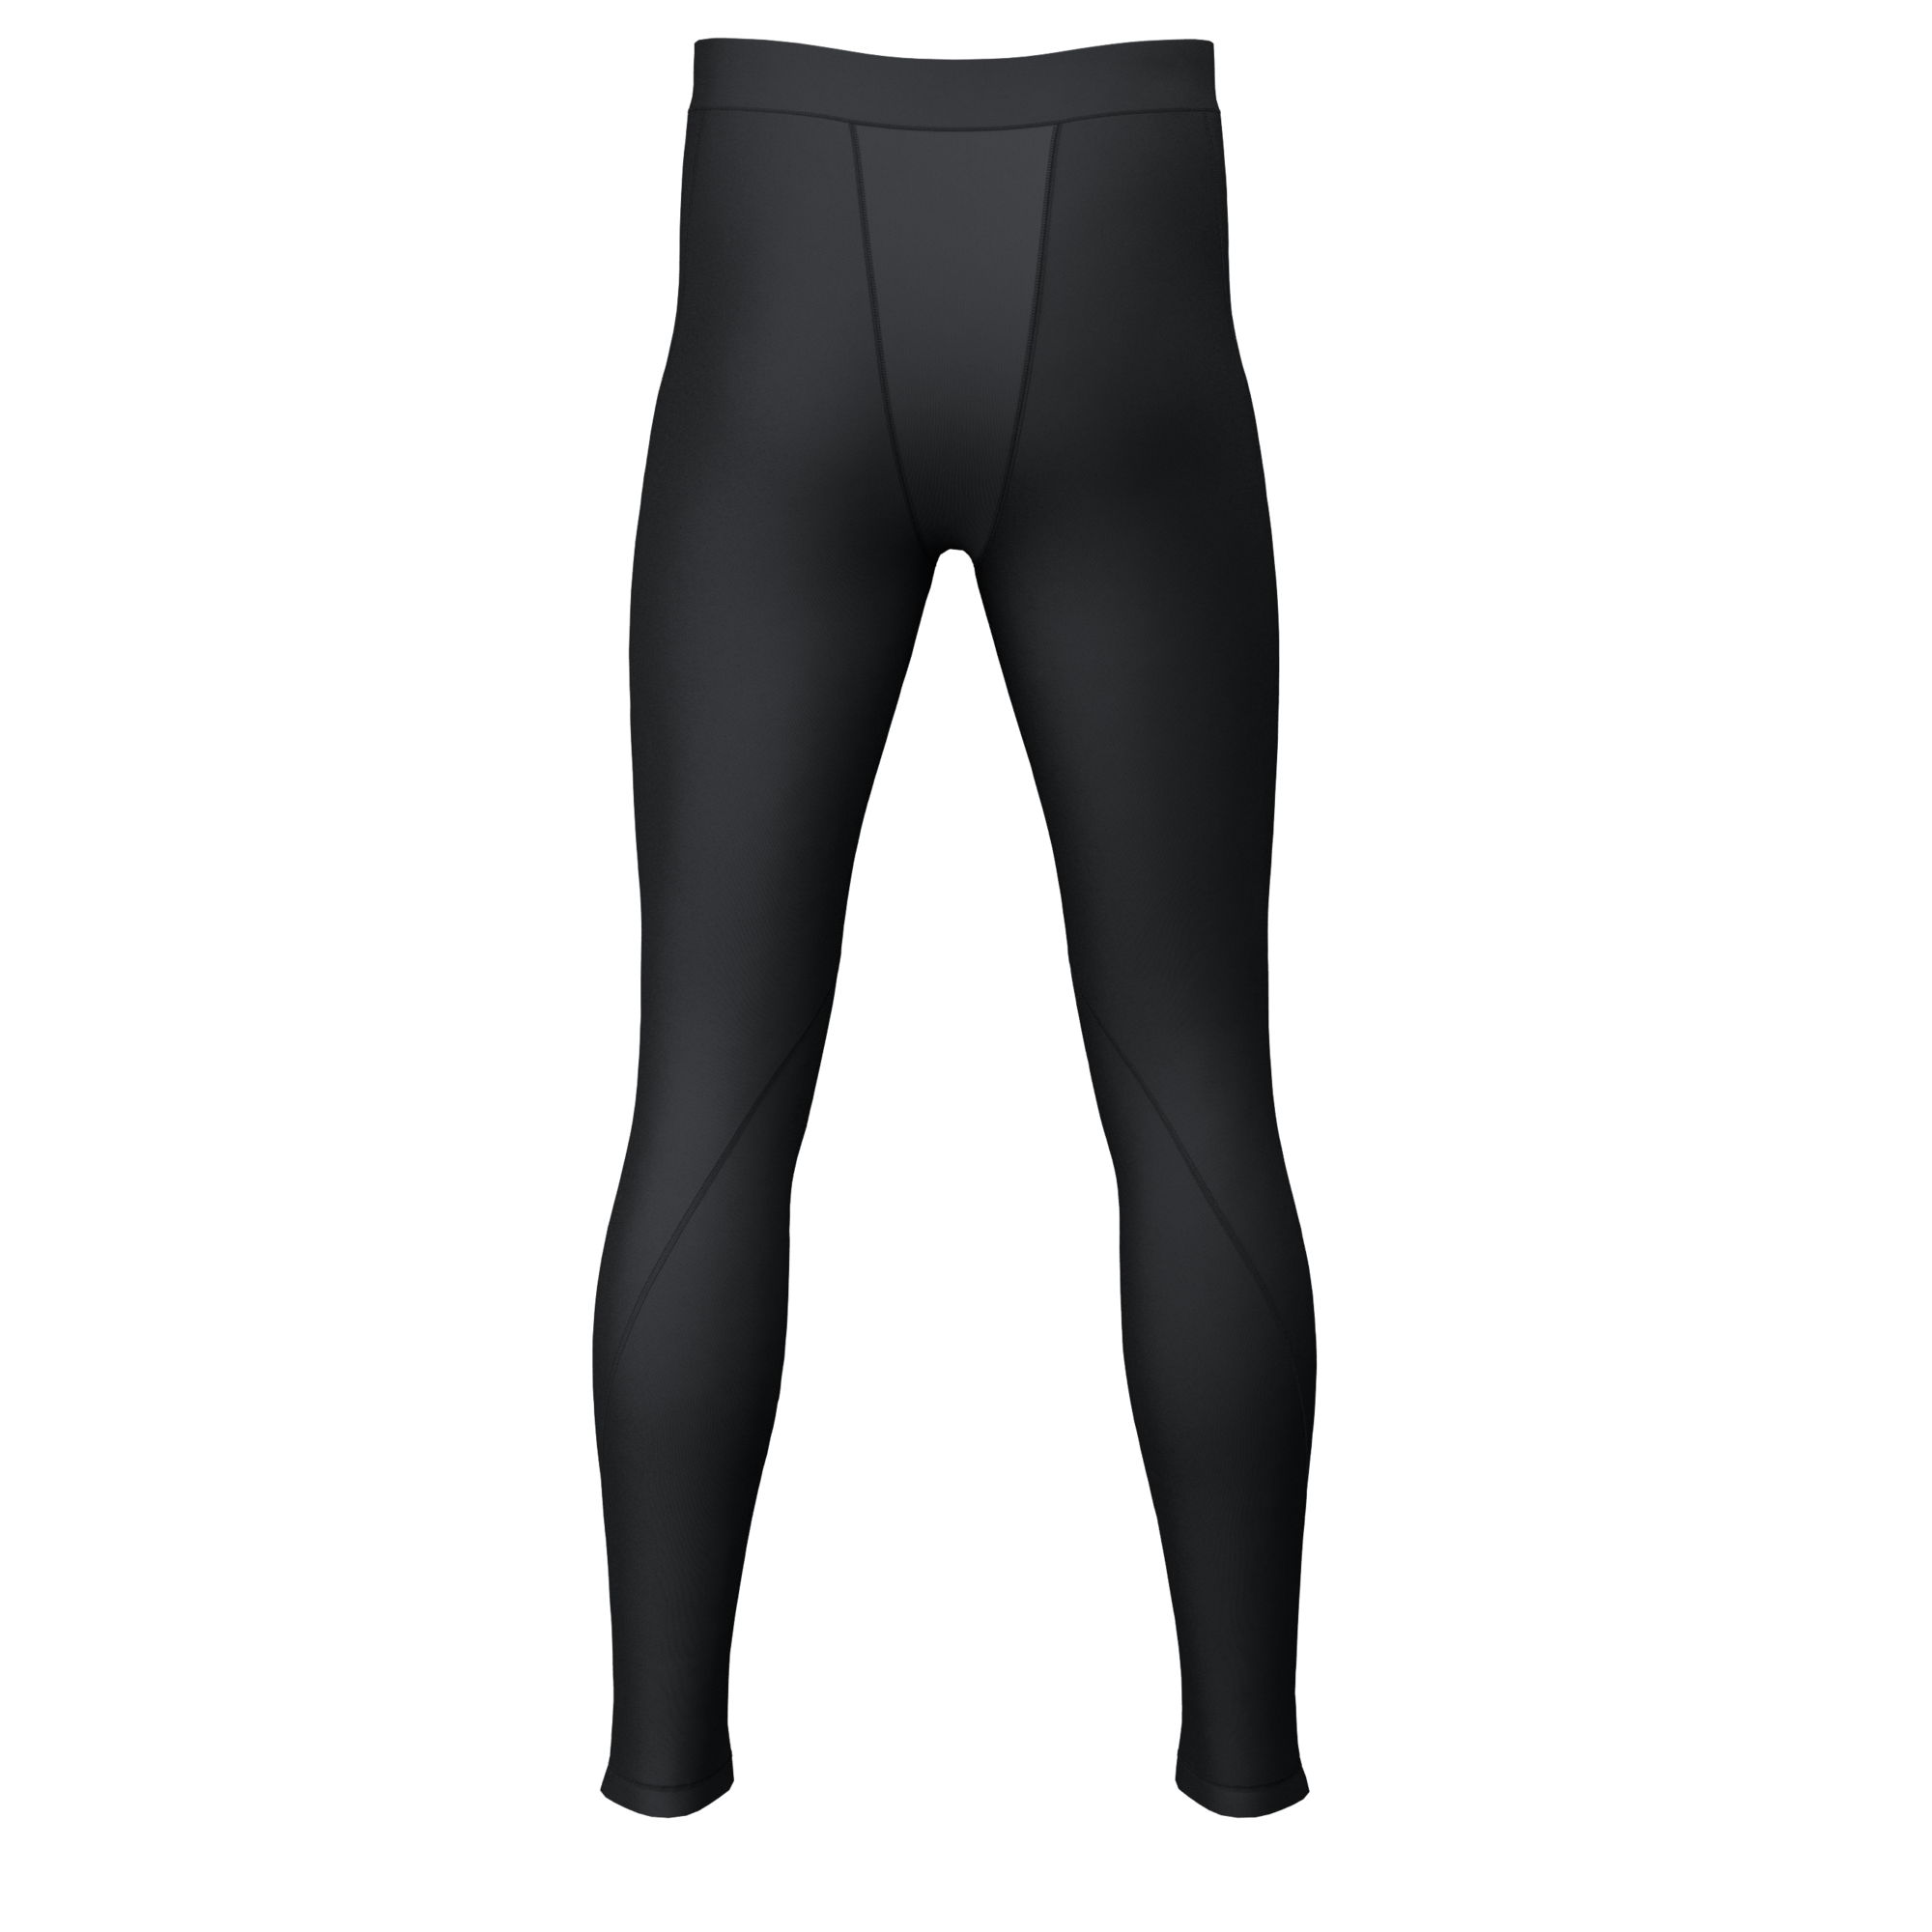 Buy Boy's Sports Running Stretch Pants Compression Football Legging at  Amazon.in